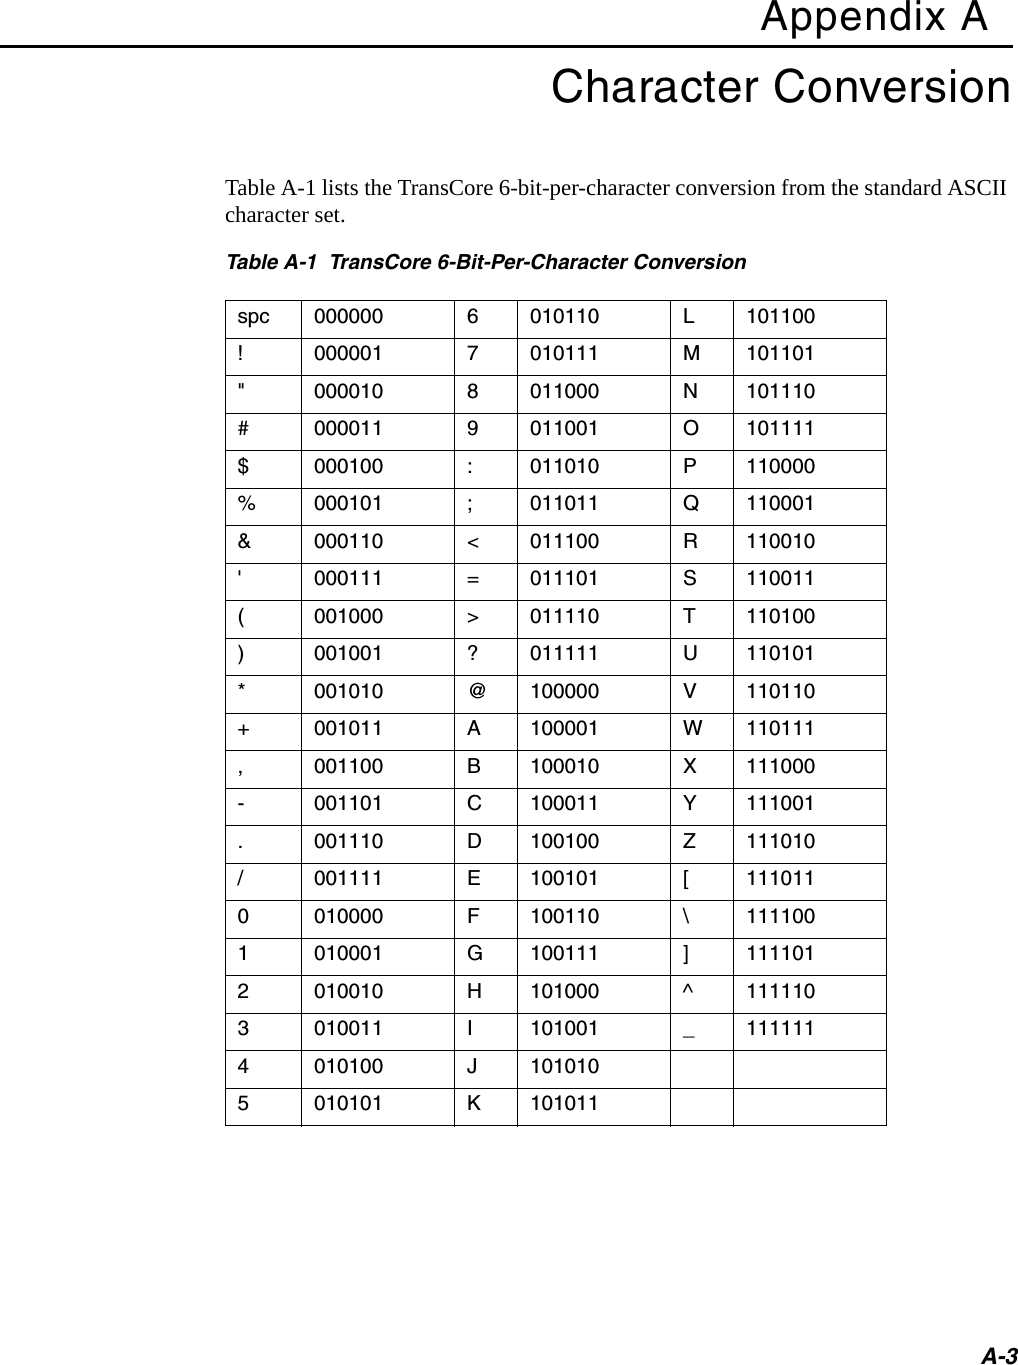 A-3Appendix ACharacter ConversionTable A-1 lists the TransCore 6-bit-per-character conversion from the standard ASCII character set.Table A-1  TransCore 6-Bit-Per-Character Conversion spc 000000 6010110 L101100!000001 7010111 M101101&quot;000010 8011000 N101110#000011 9011001 O101111$000100 :011010 P110000%000101 ;011011 Q110001&amp;000110 &lt;011100 R110010&apos;000111 =011101 S110011(001000 &gt;011110 T110100)001001 ?011111 U110101*001010 @100000 V110110+001011 A100001 W110111,001100 B100010 X111000-001101 C100011 Y111001.001110 D100100 Z111010/001111 E100101 [1110110010000 F100110 \1111001010001 G100111 ]1111012010010 H101000 ^1111103010011 I101001 _1111114010100 J1010105010101 K101011